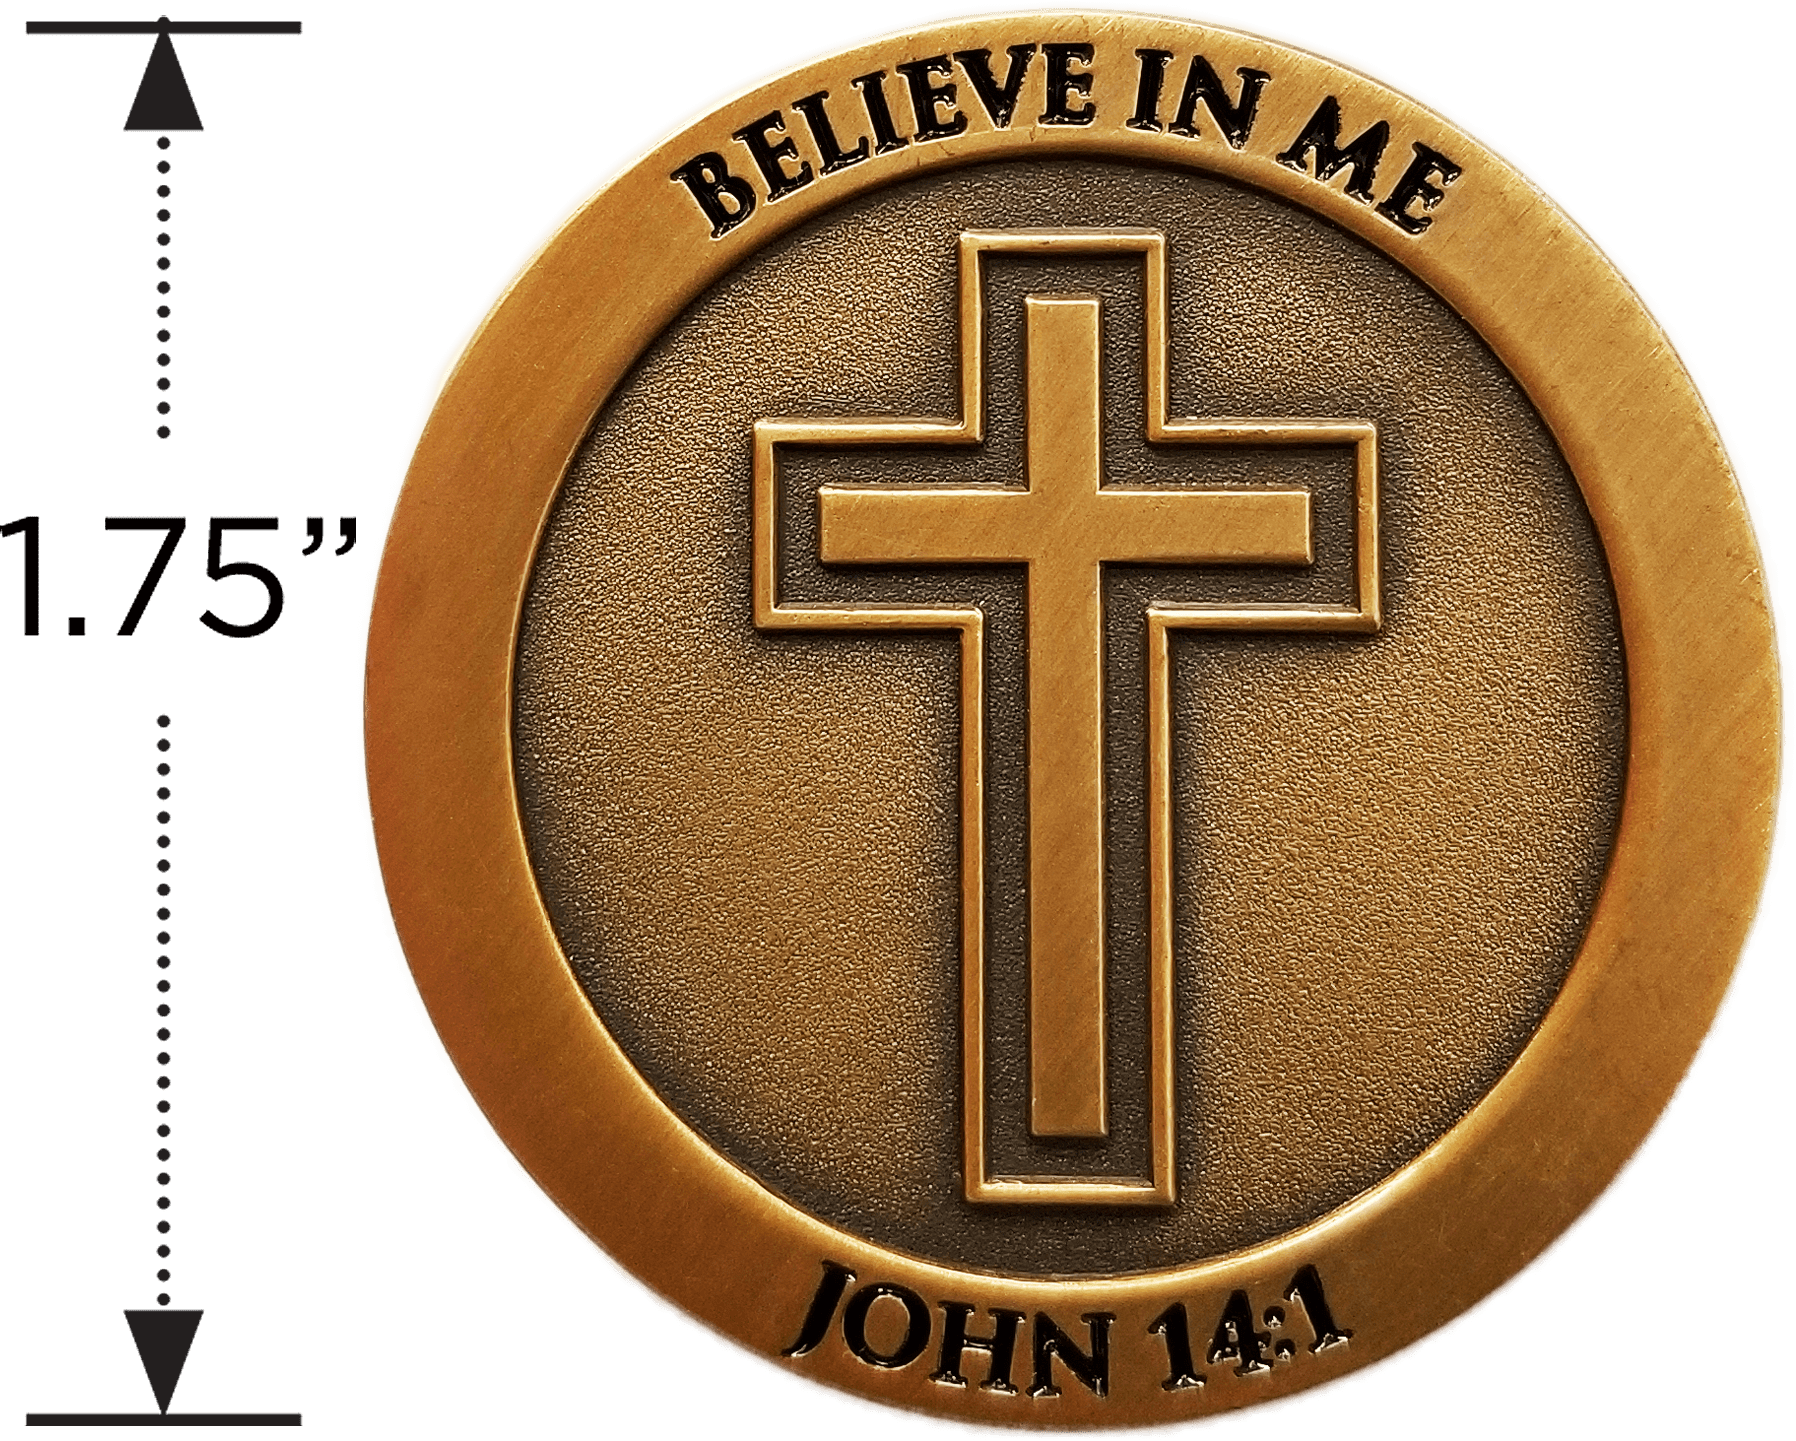 Don't Be Anxious Antique Gold Plated Christian Challenge Coin measured to show the size diameter